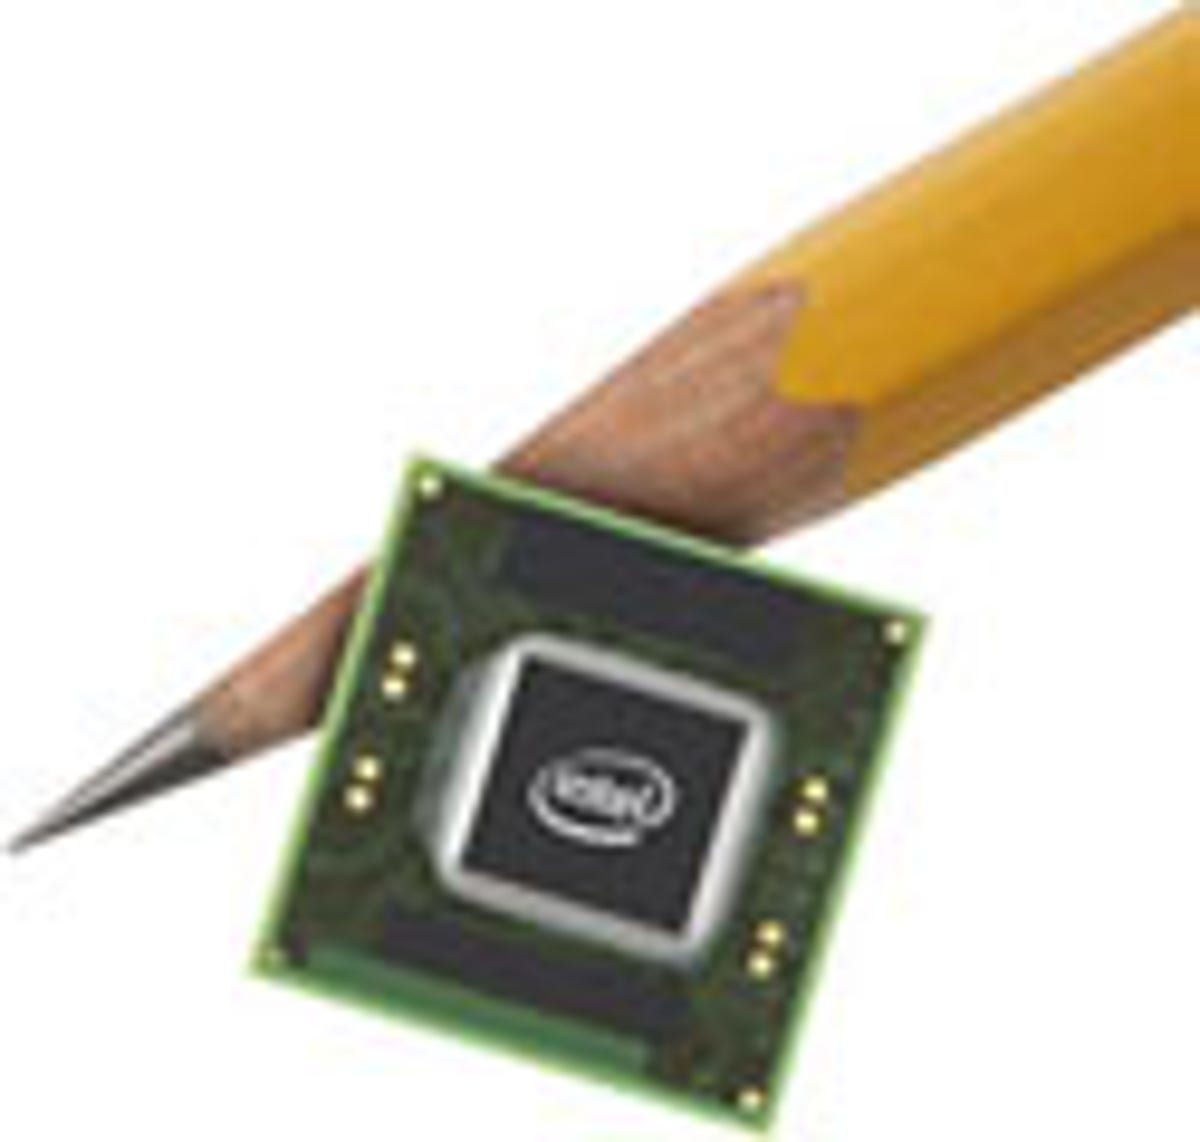 The size of Intel's Thunderbolt chip.